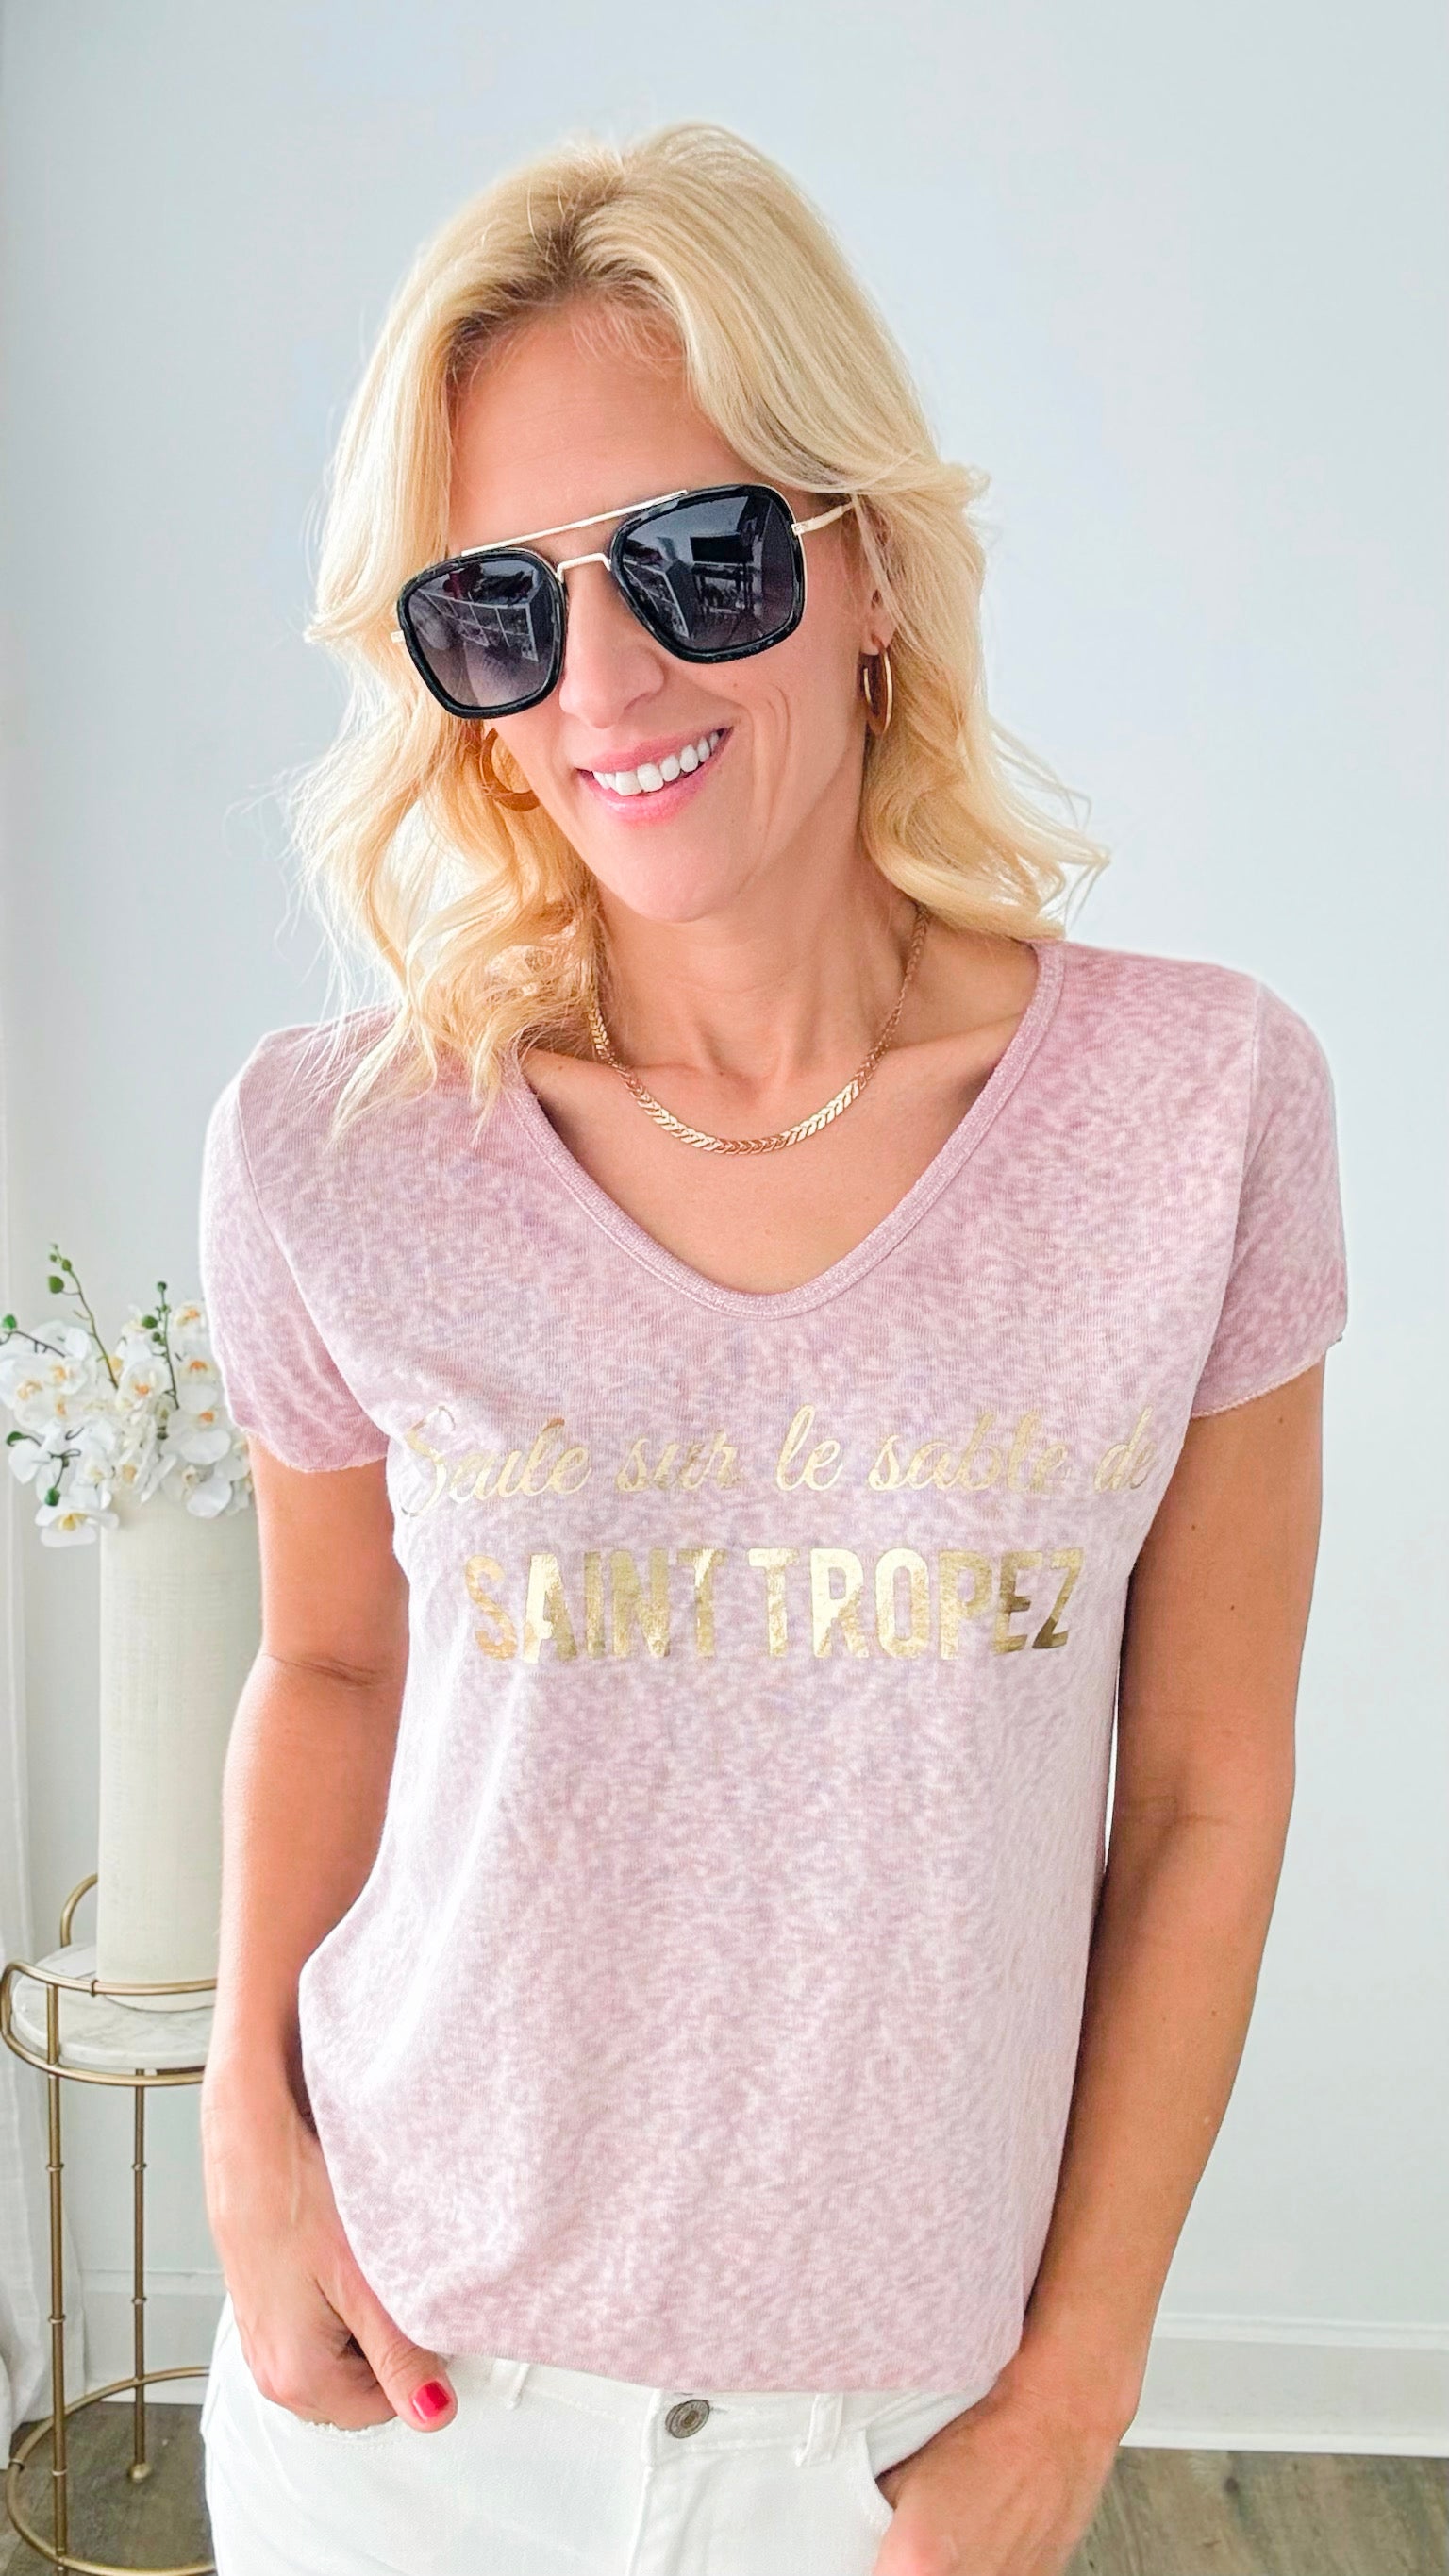 Sands Of St Tropez Italian Top - Blush-110 Short Sleeve Tops-moda italia-Coastal Bloom Boutique, find the trendiest versions of the popular styles and looks Located in Indialantic, FL